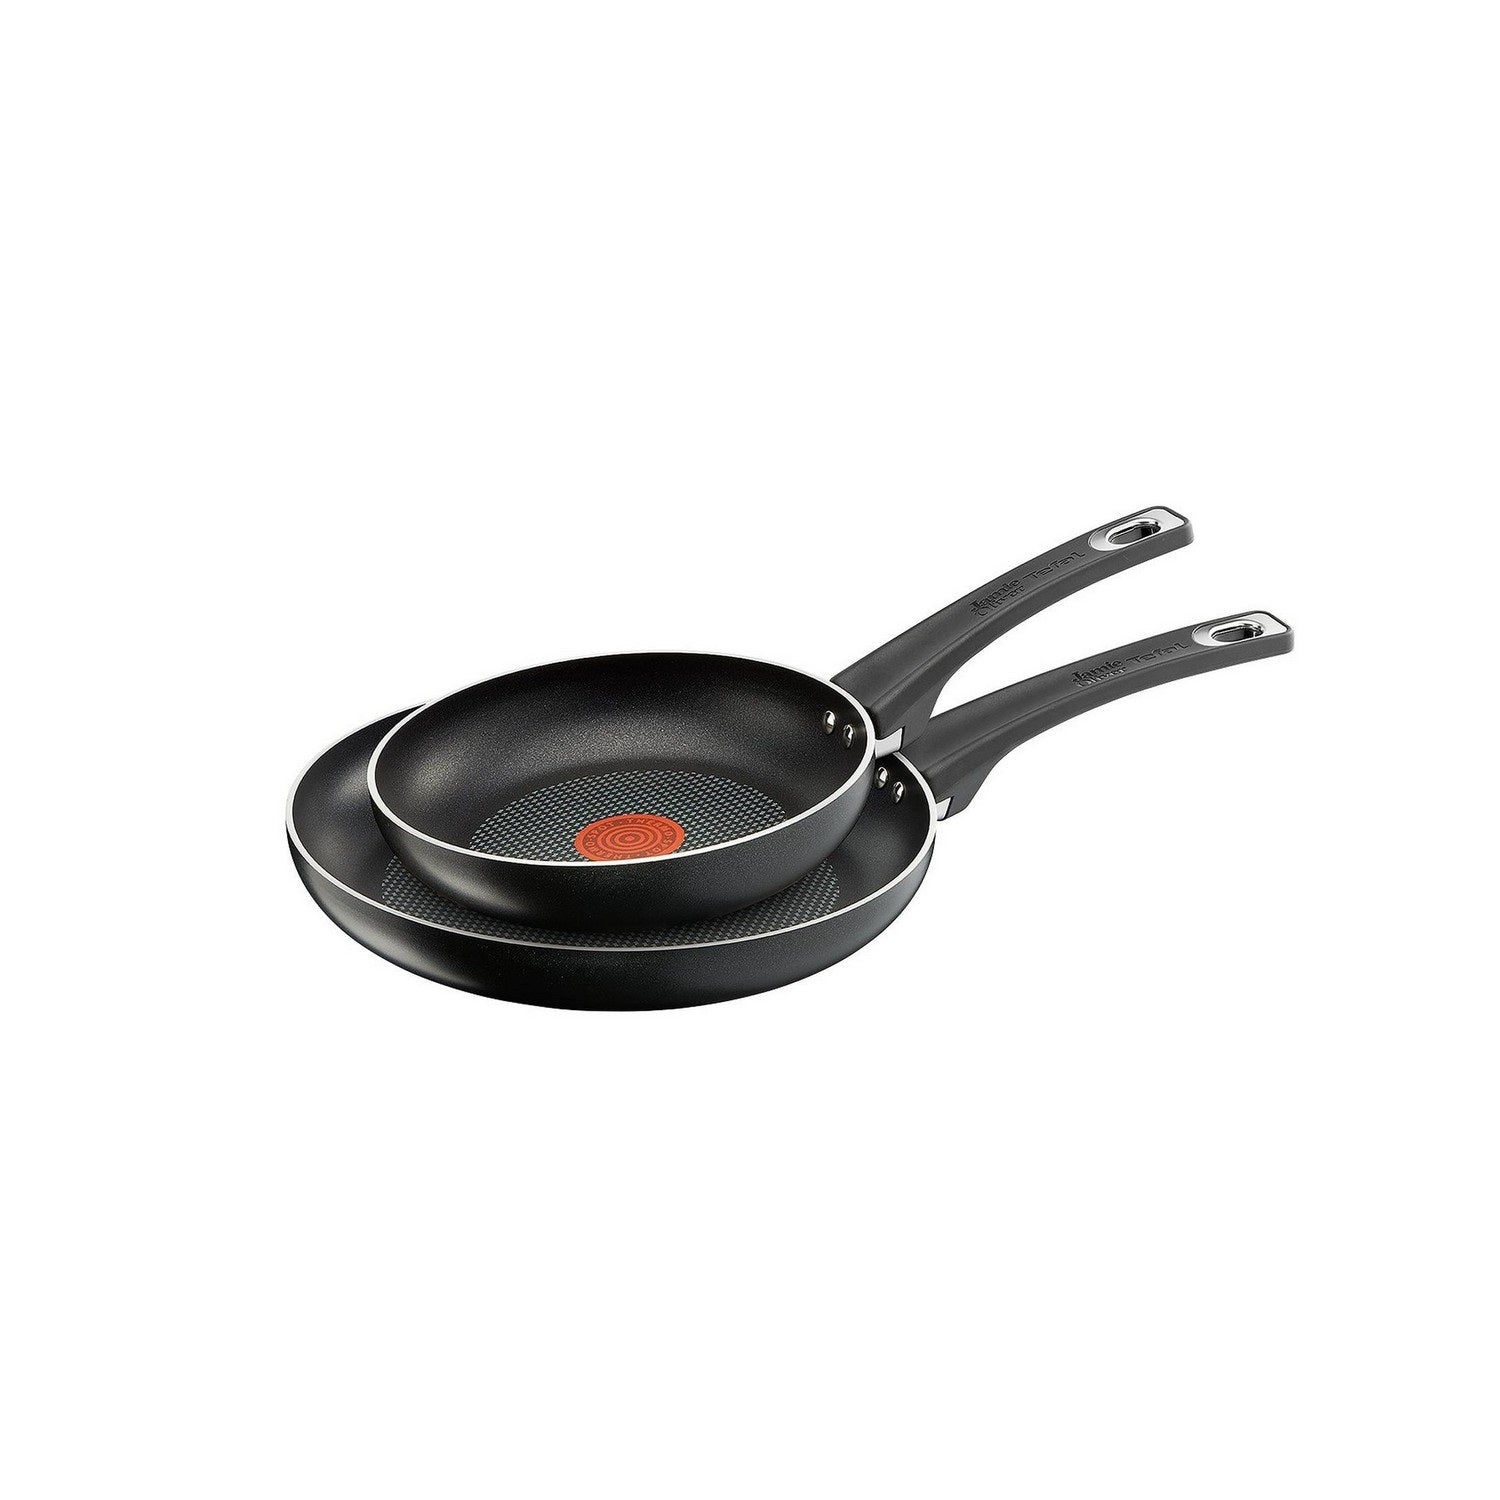 Tefal Jamie Oliver Set of 2 Stainless Steel Non stick Frying Pan 20 / 26cm,  INDUCTION COMPATIBLE